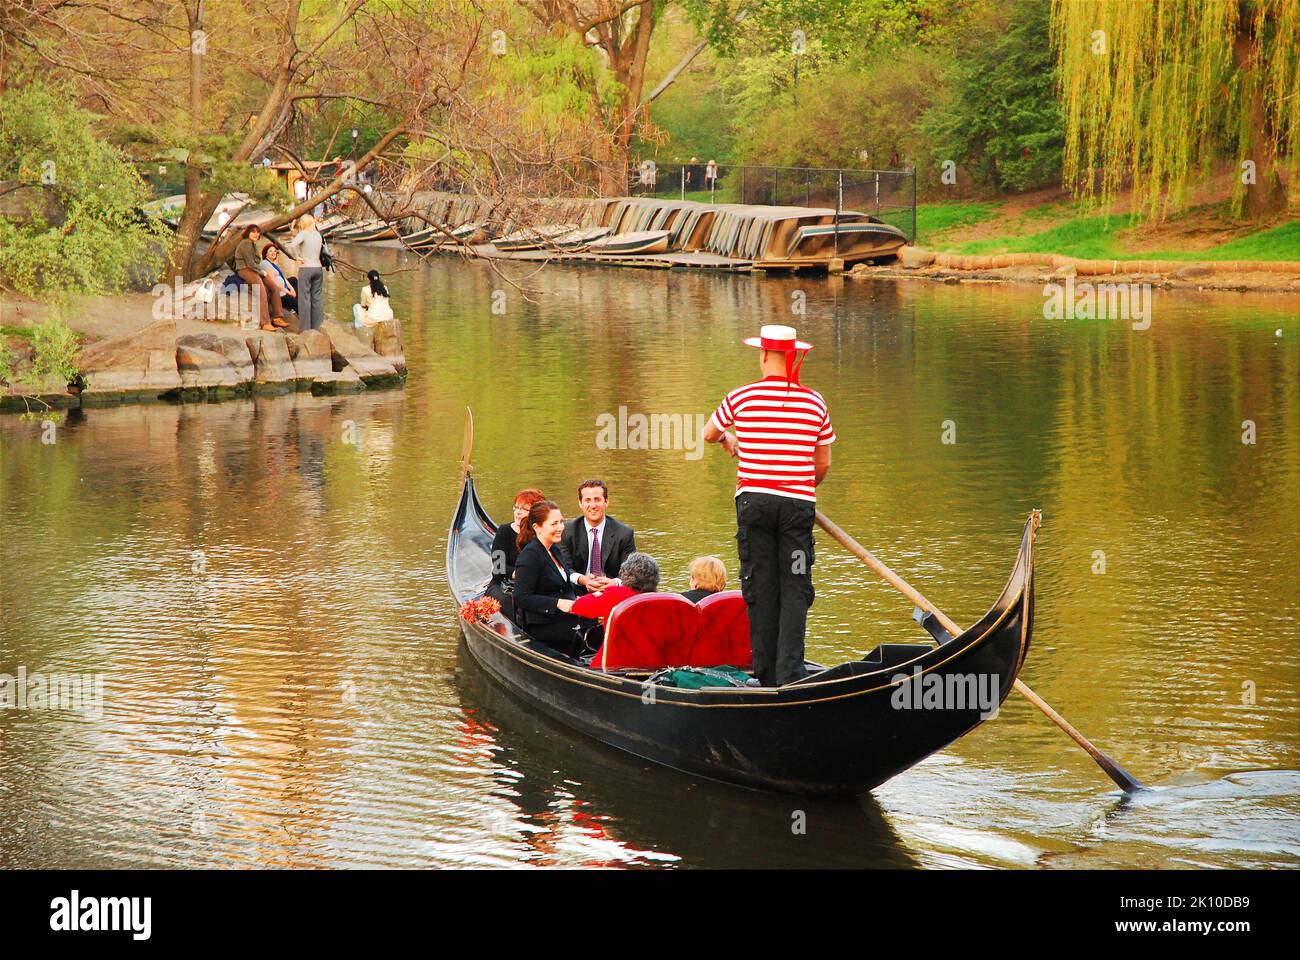 A Venetian gondolier steers a gondola across the lake in New York City Central park, providing a romantic setting for the two couples on board Stock Photo